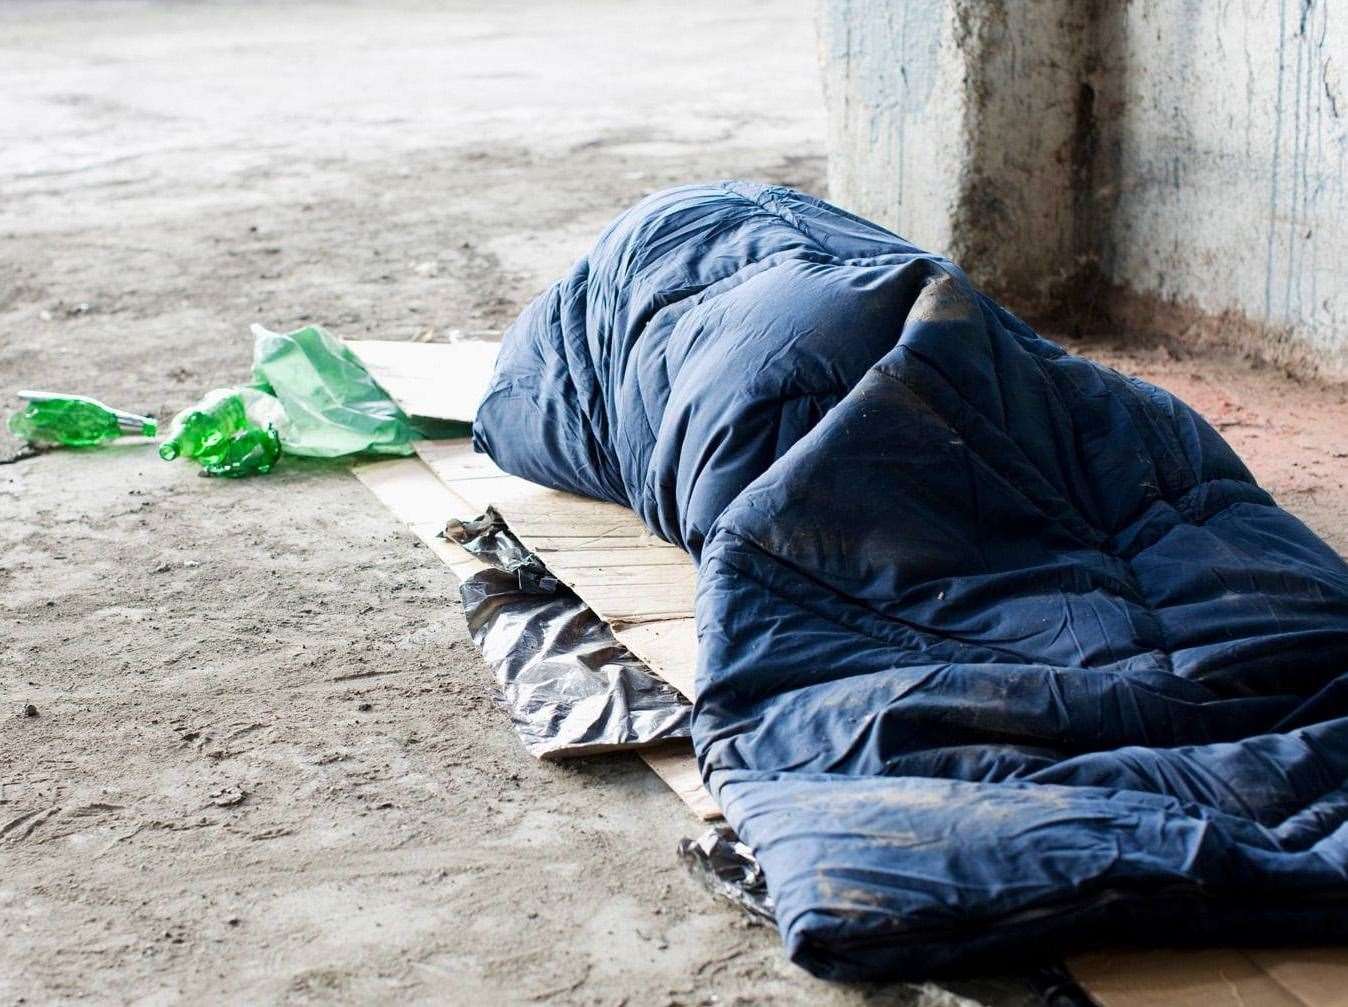 There are fears rough sleeping could worsen now the government's "Everyone In" scheme has ended. Picture: Canterbury City Council